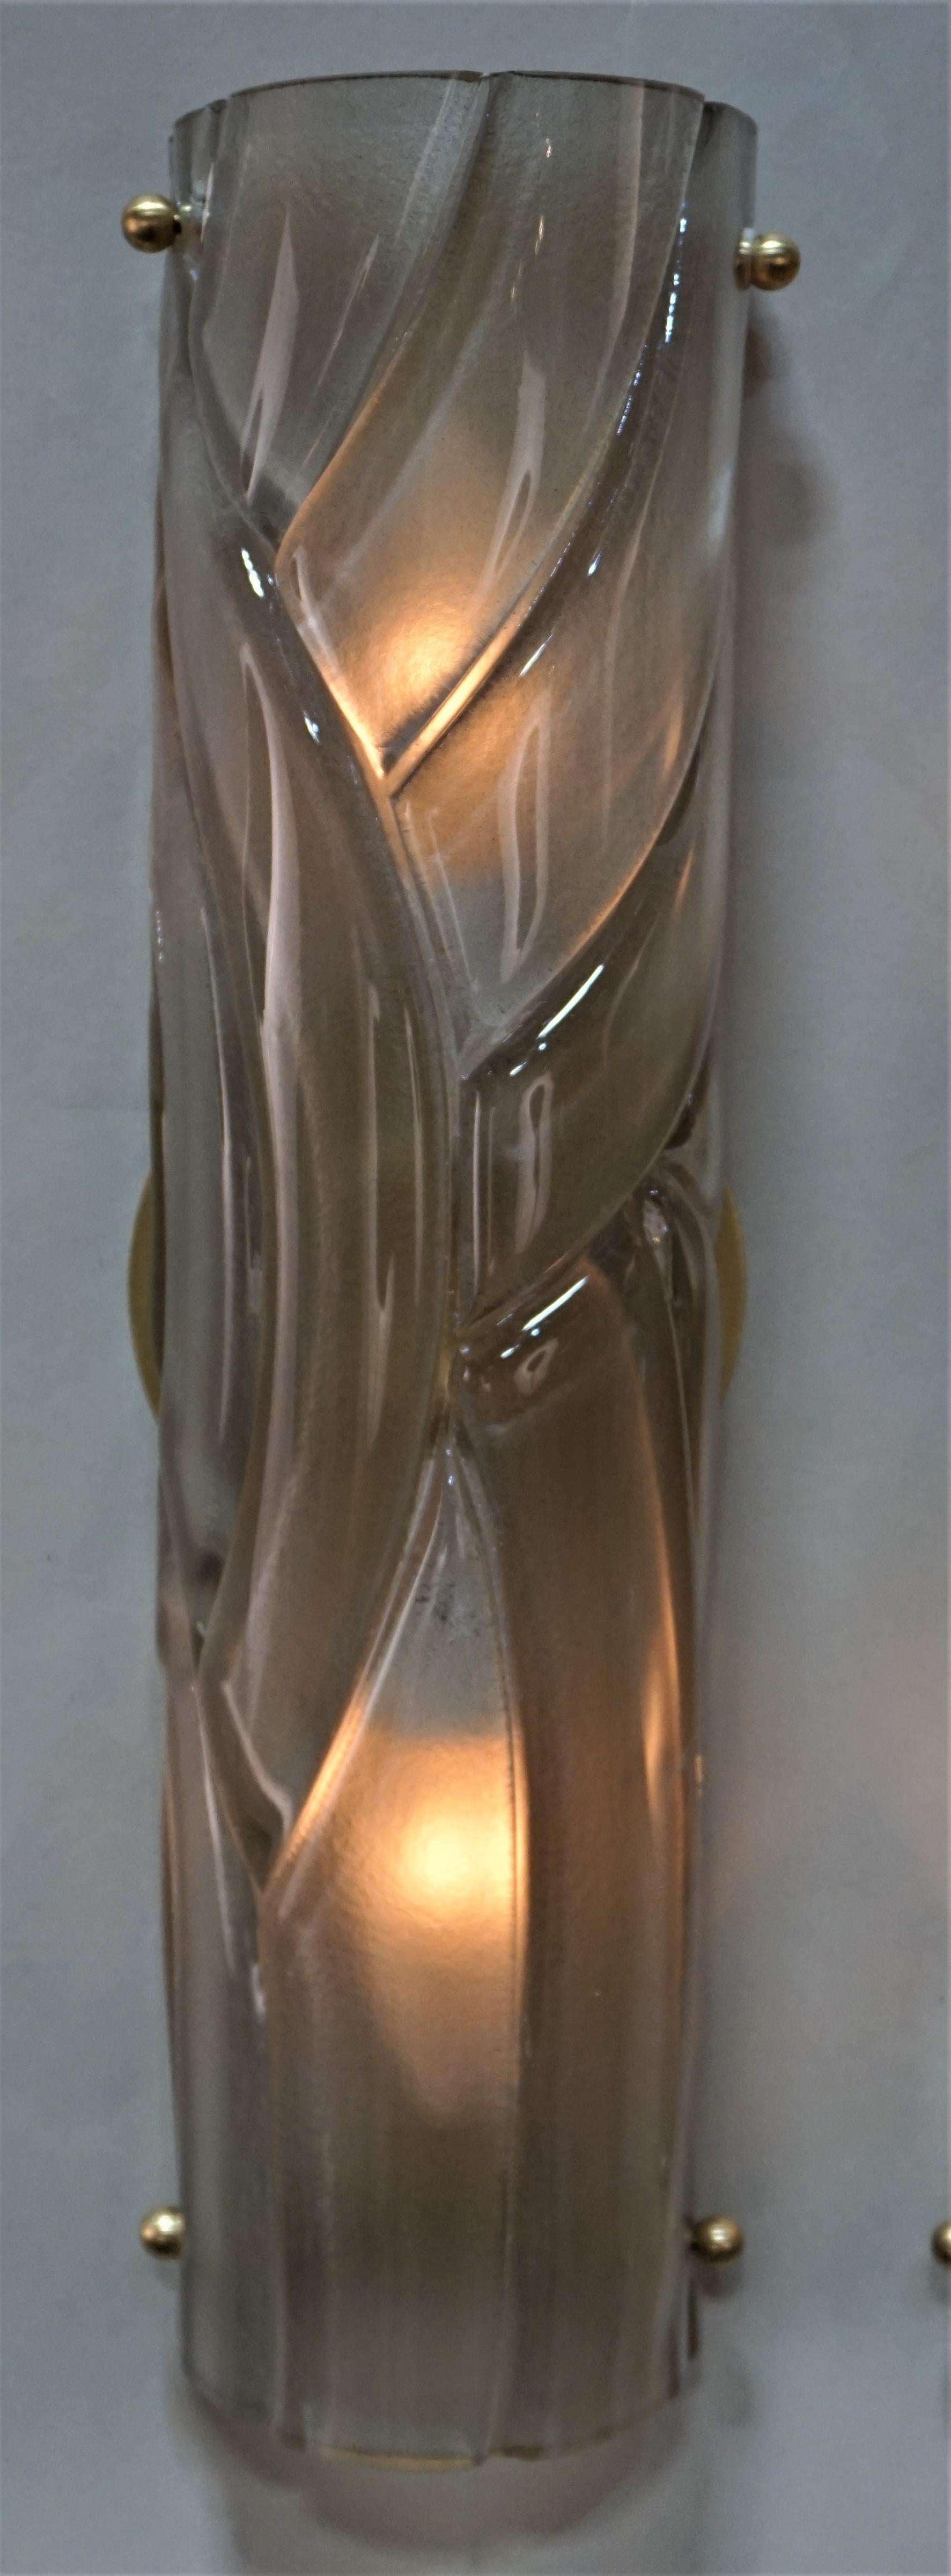 Set of four smoked color blown glass wall sconces
Priced individually, sold in pairs.